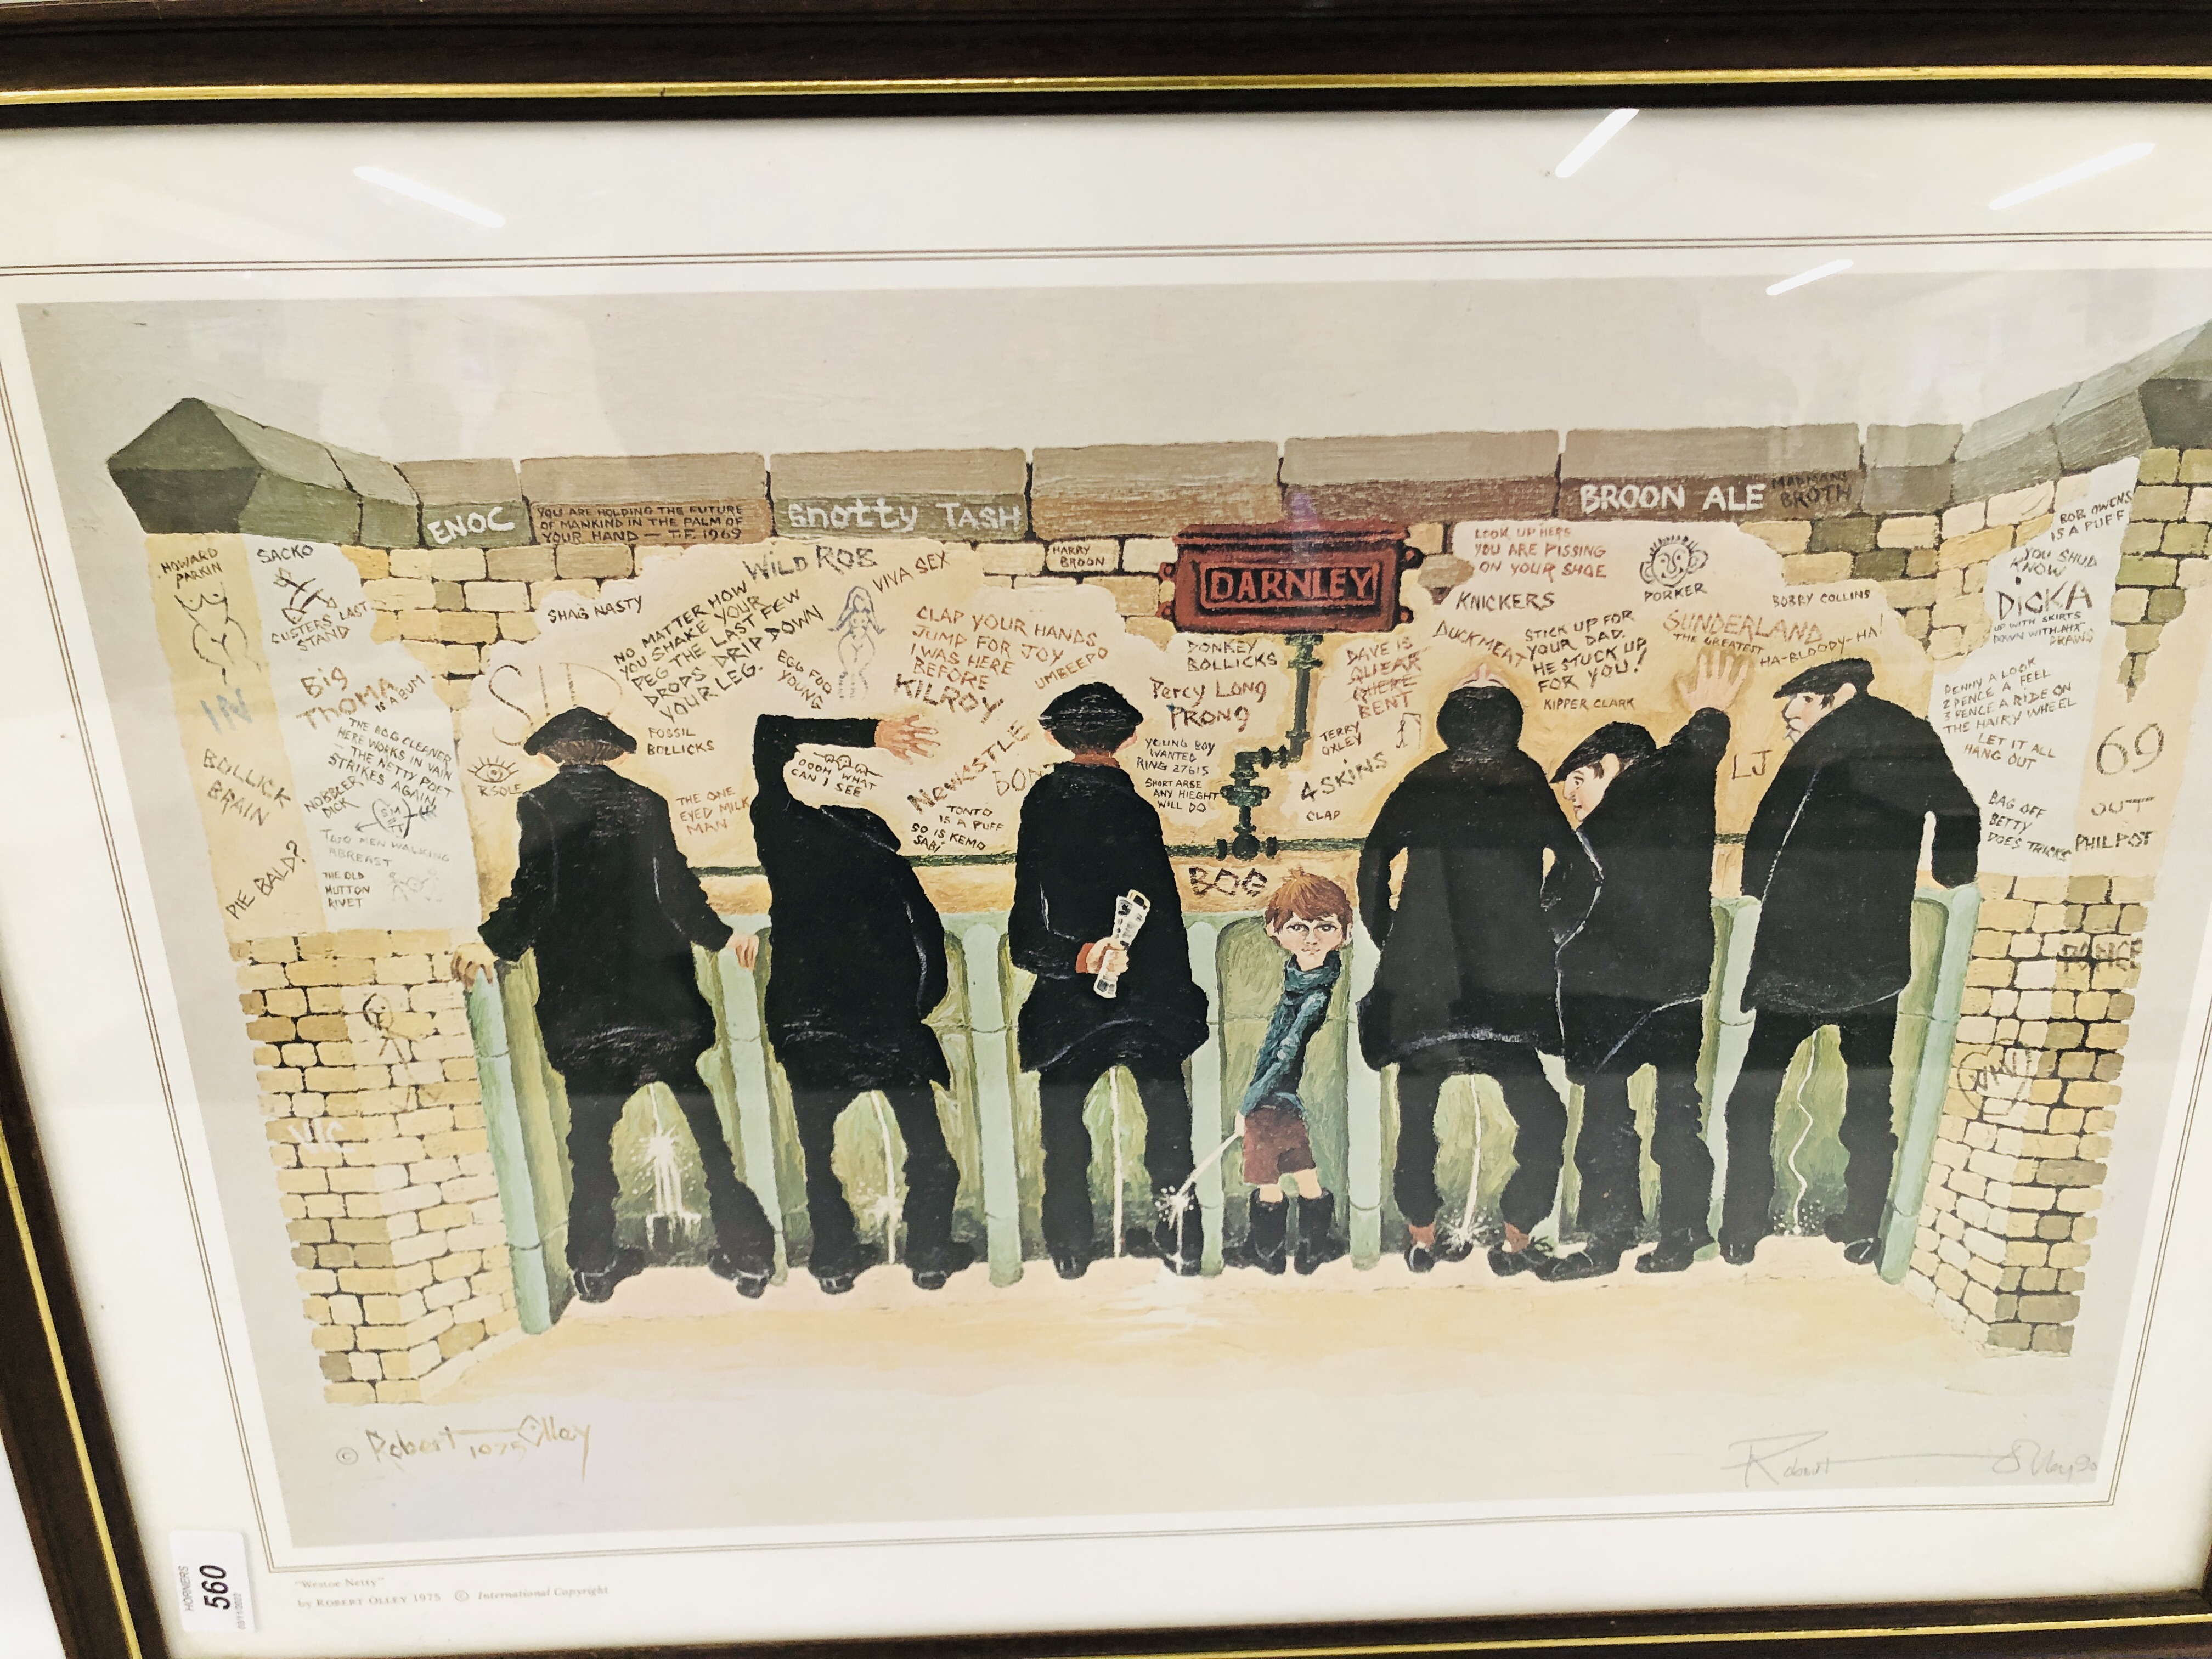 A FRAMED AND MOUNTED PRINT "WESTOE NETTY" BEARING SIGNATURE ROBERT OLLEY 1975. - Image 2 of 5